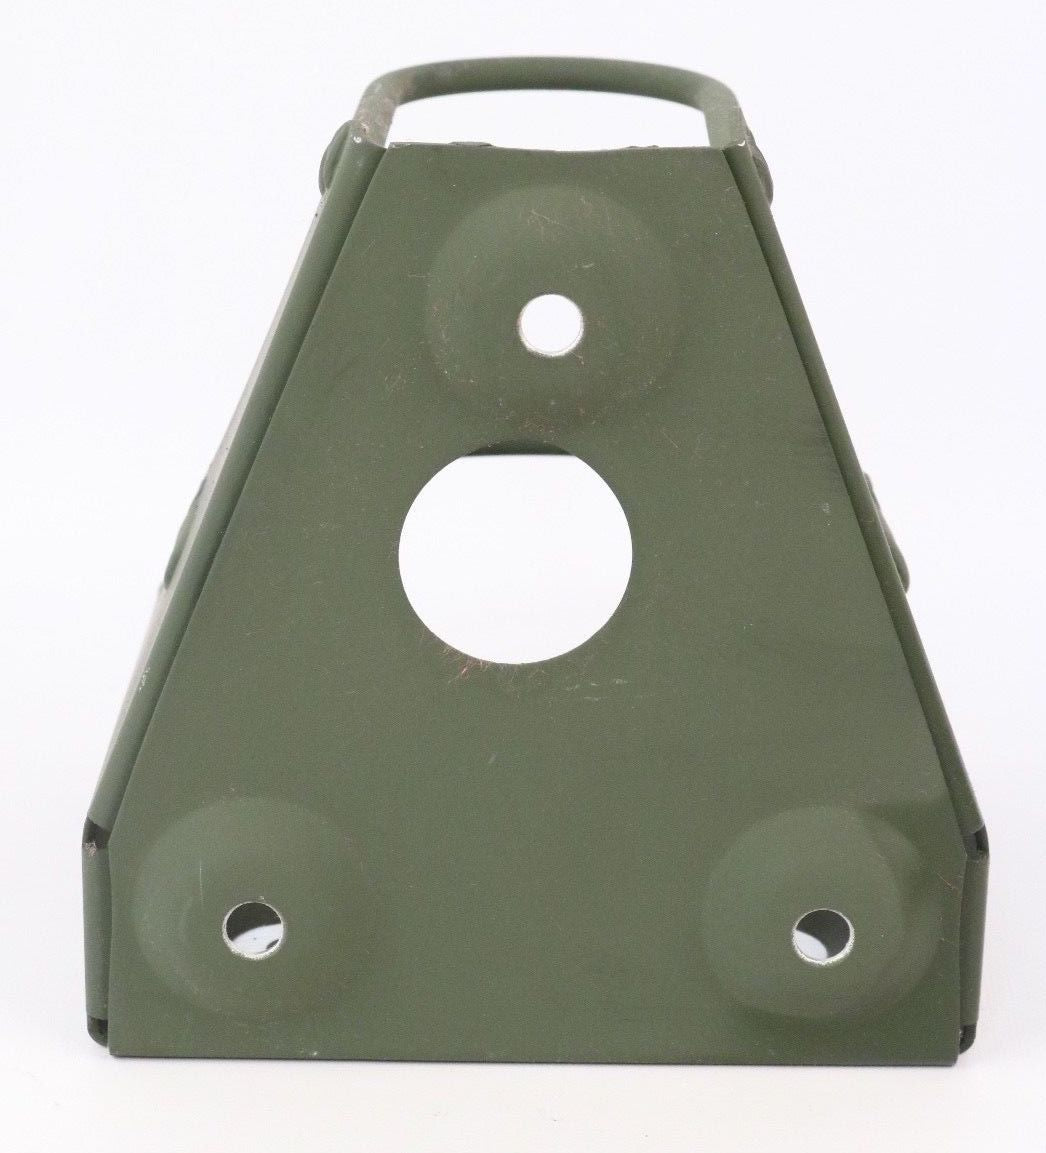 New Hmmwv Antenna Mounting Bracket Only Humvee 5340-01-197-5470 – Federal  Military Parts (763) 310-9340